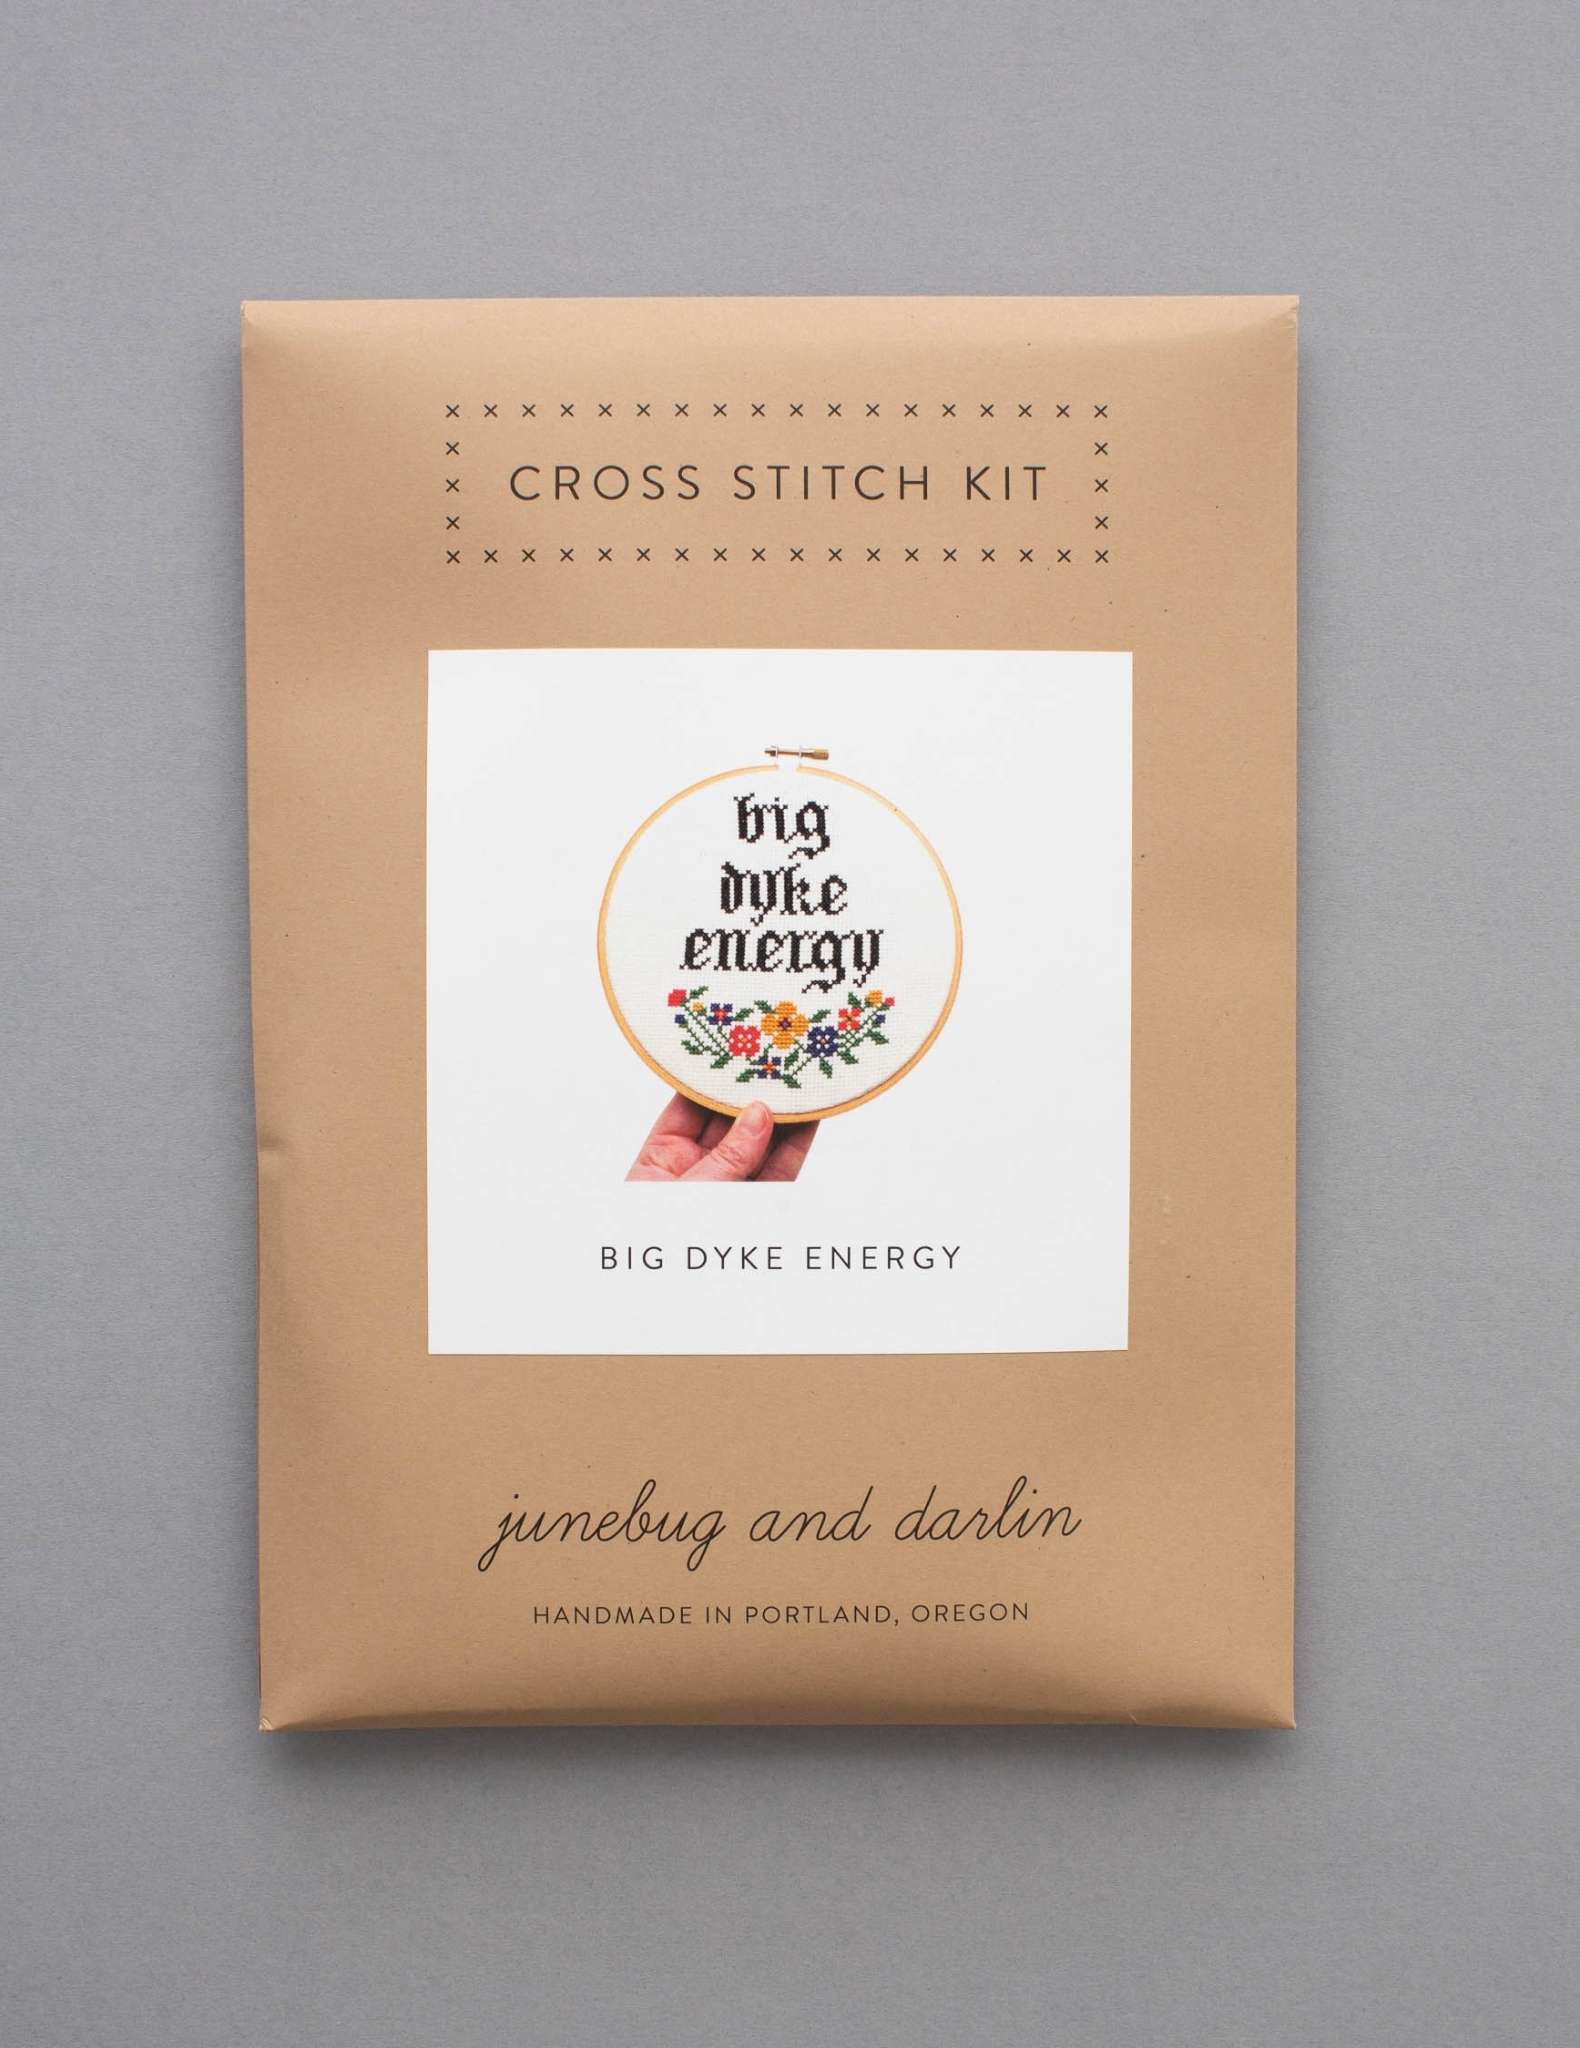 A cross stitch kit in a brown enveloping showing a design with the text 'Big Dyke Energy'